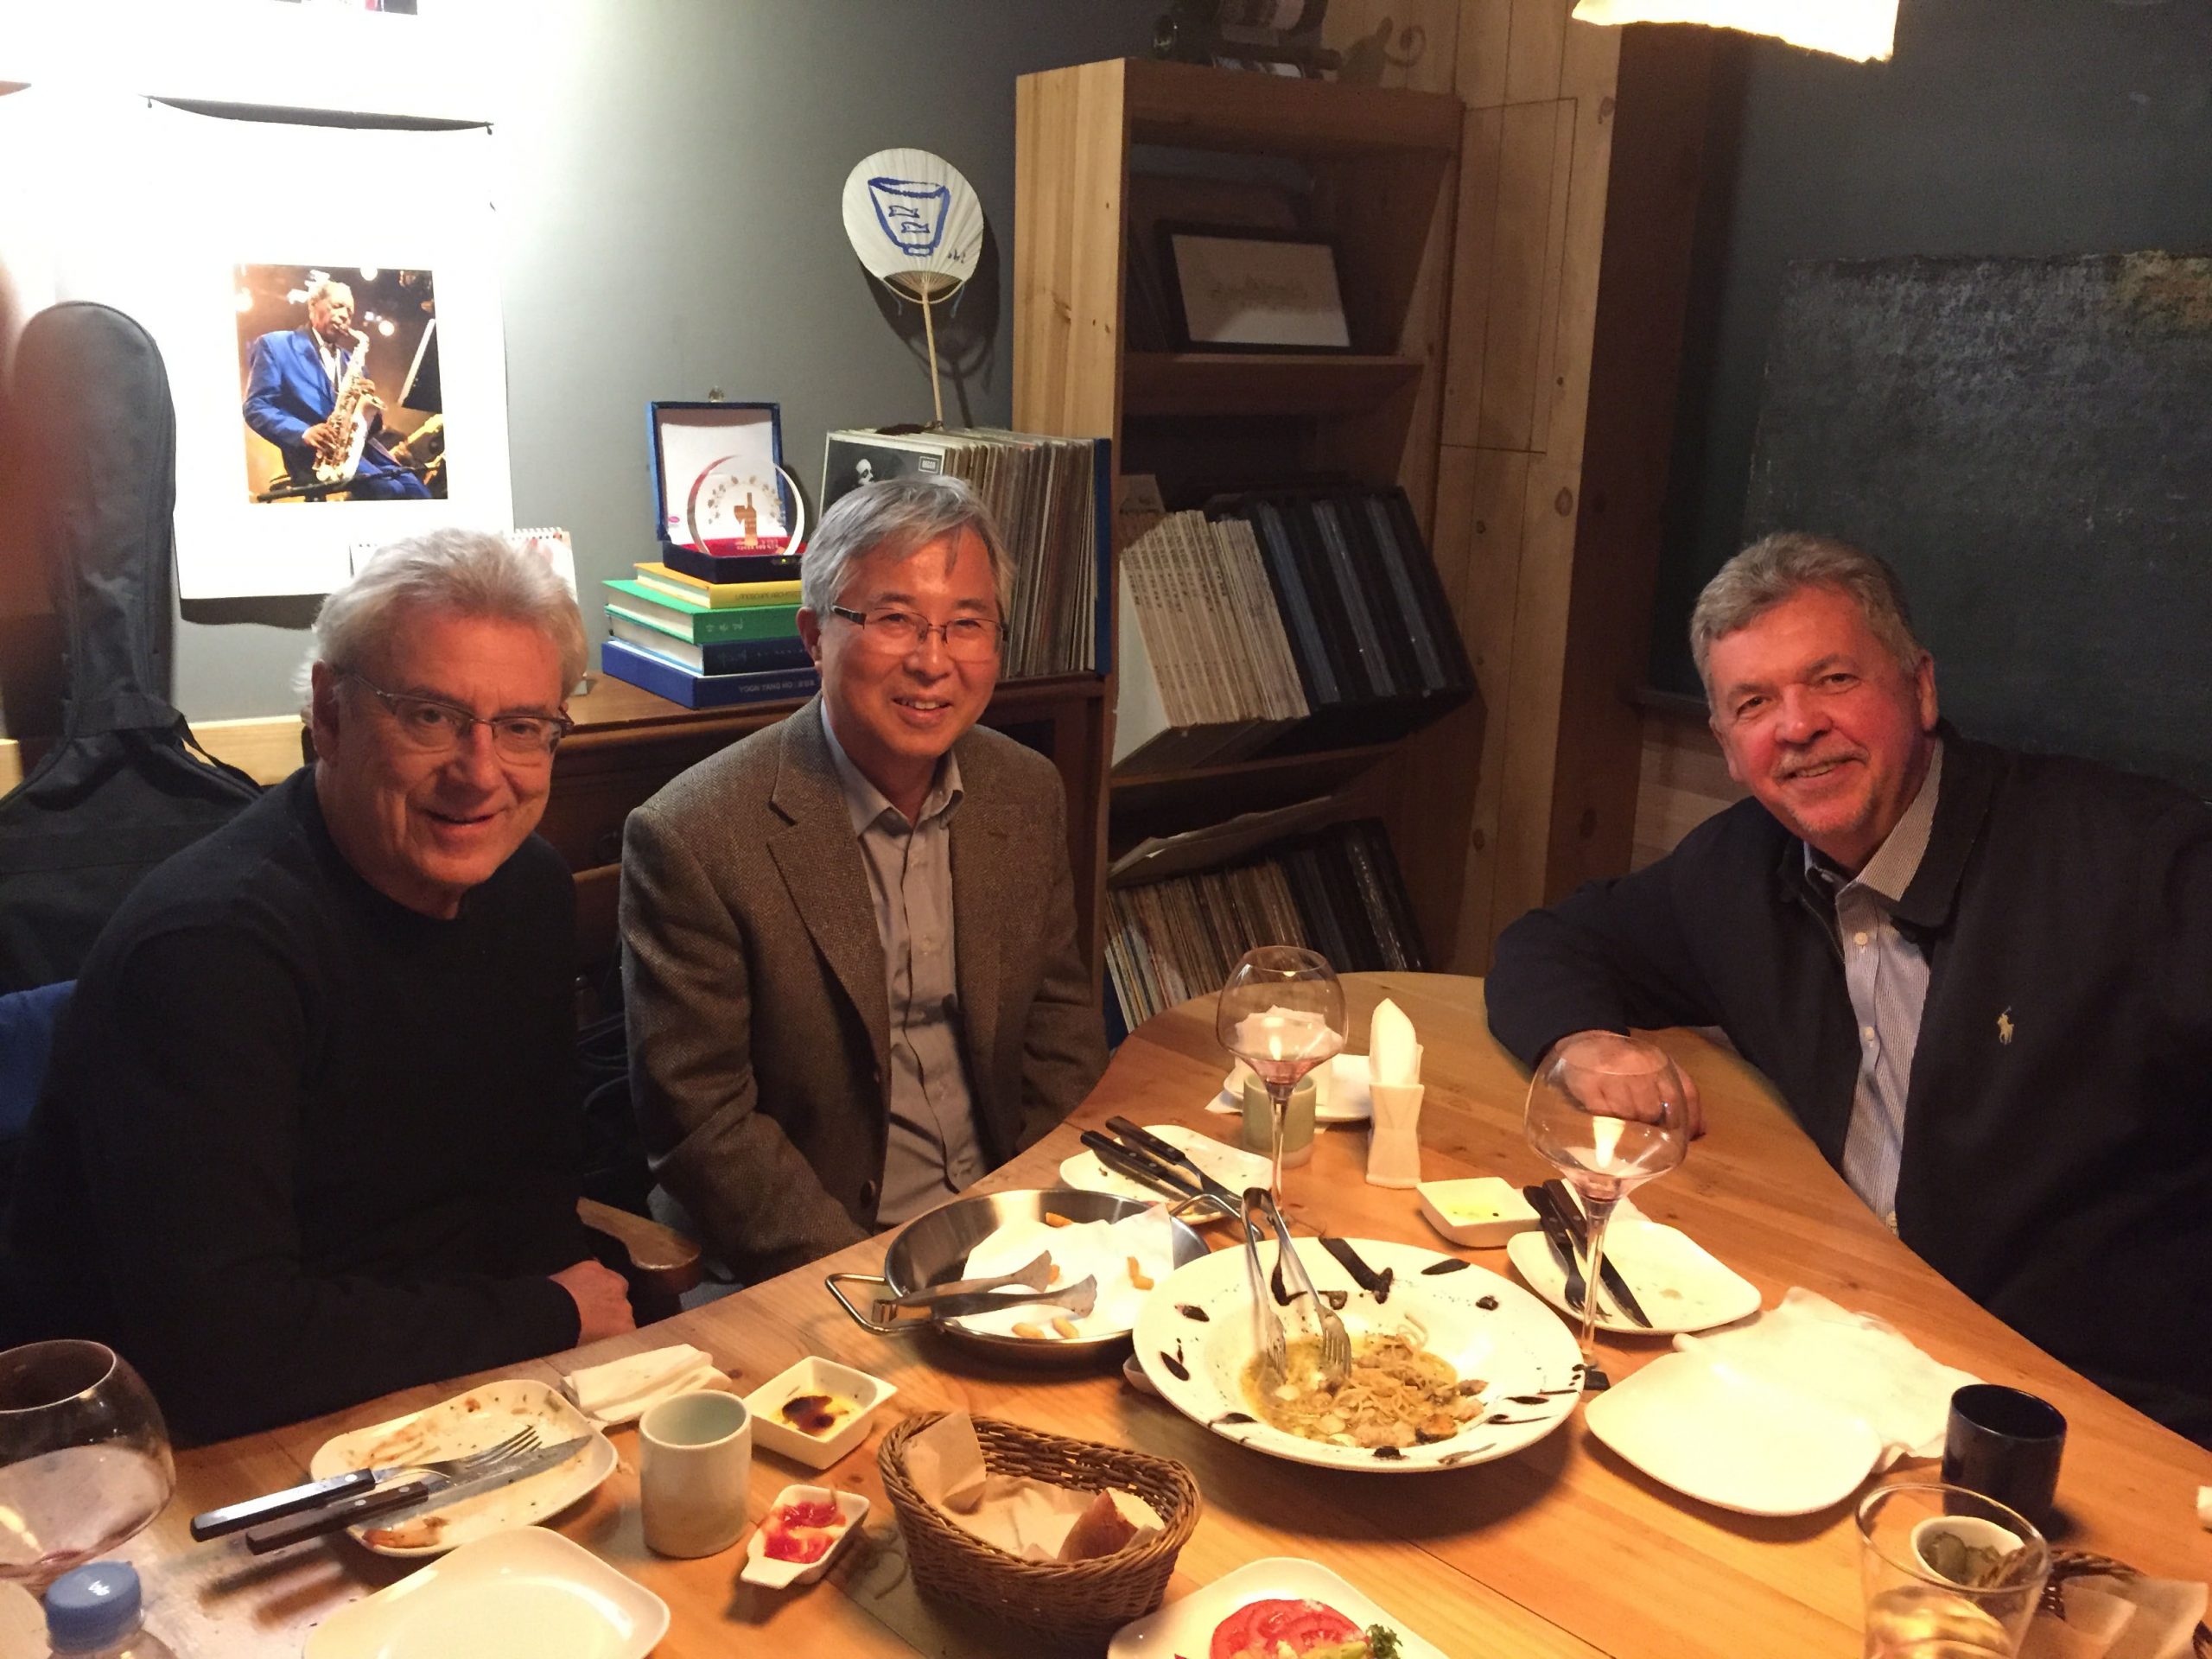 The authors sit around a dinner table at a restaurant.